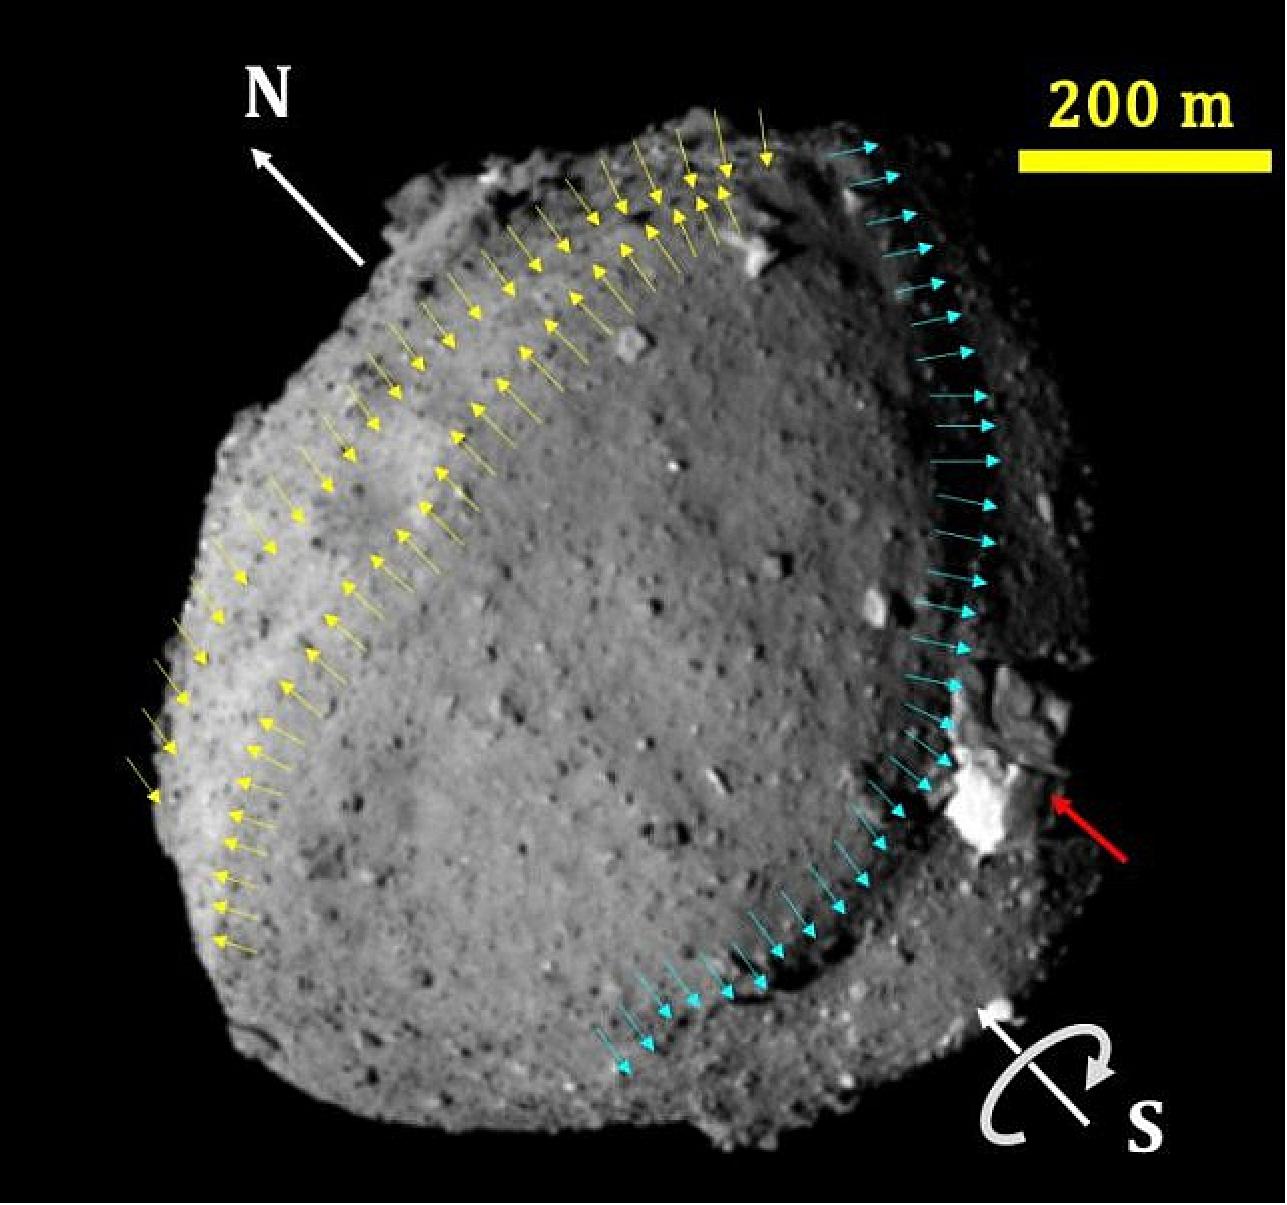 Figure 60: An oblique view of Ryugu showing the circum-equatorial ridge (yellow arrows), trough (blue arrows) extending from the equatorial region through the south polar region to the other side of Ryugu, and the large and bright Otohime Saxum (red arrow) near the south pole. The location of the poles and the spin direction are indicated with white arrows (image credit: 2019 Seiji Sugita et al., Science)